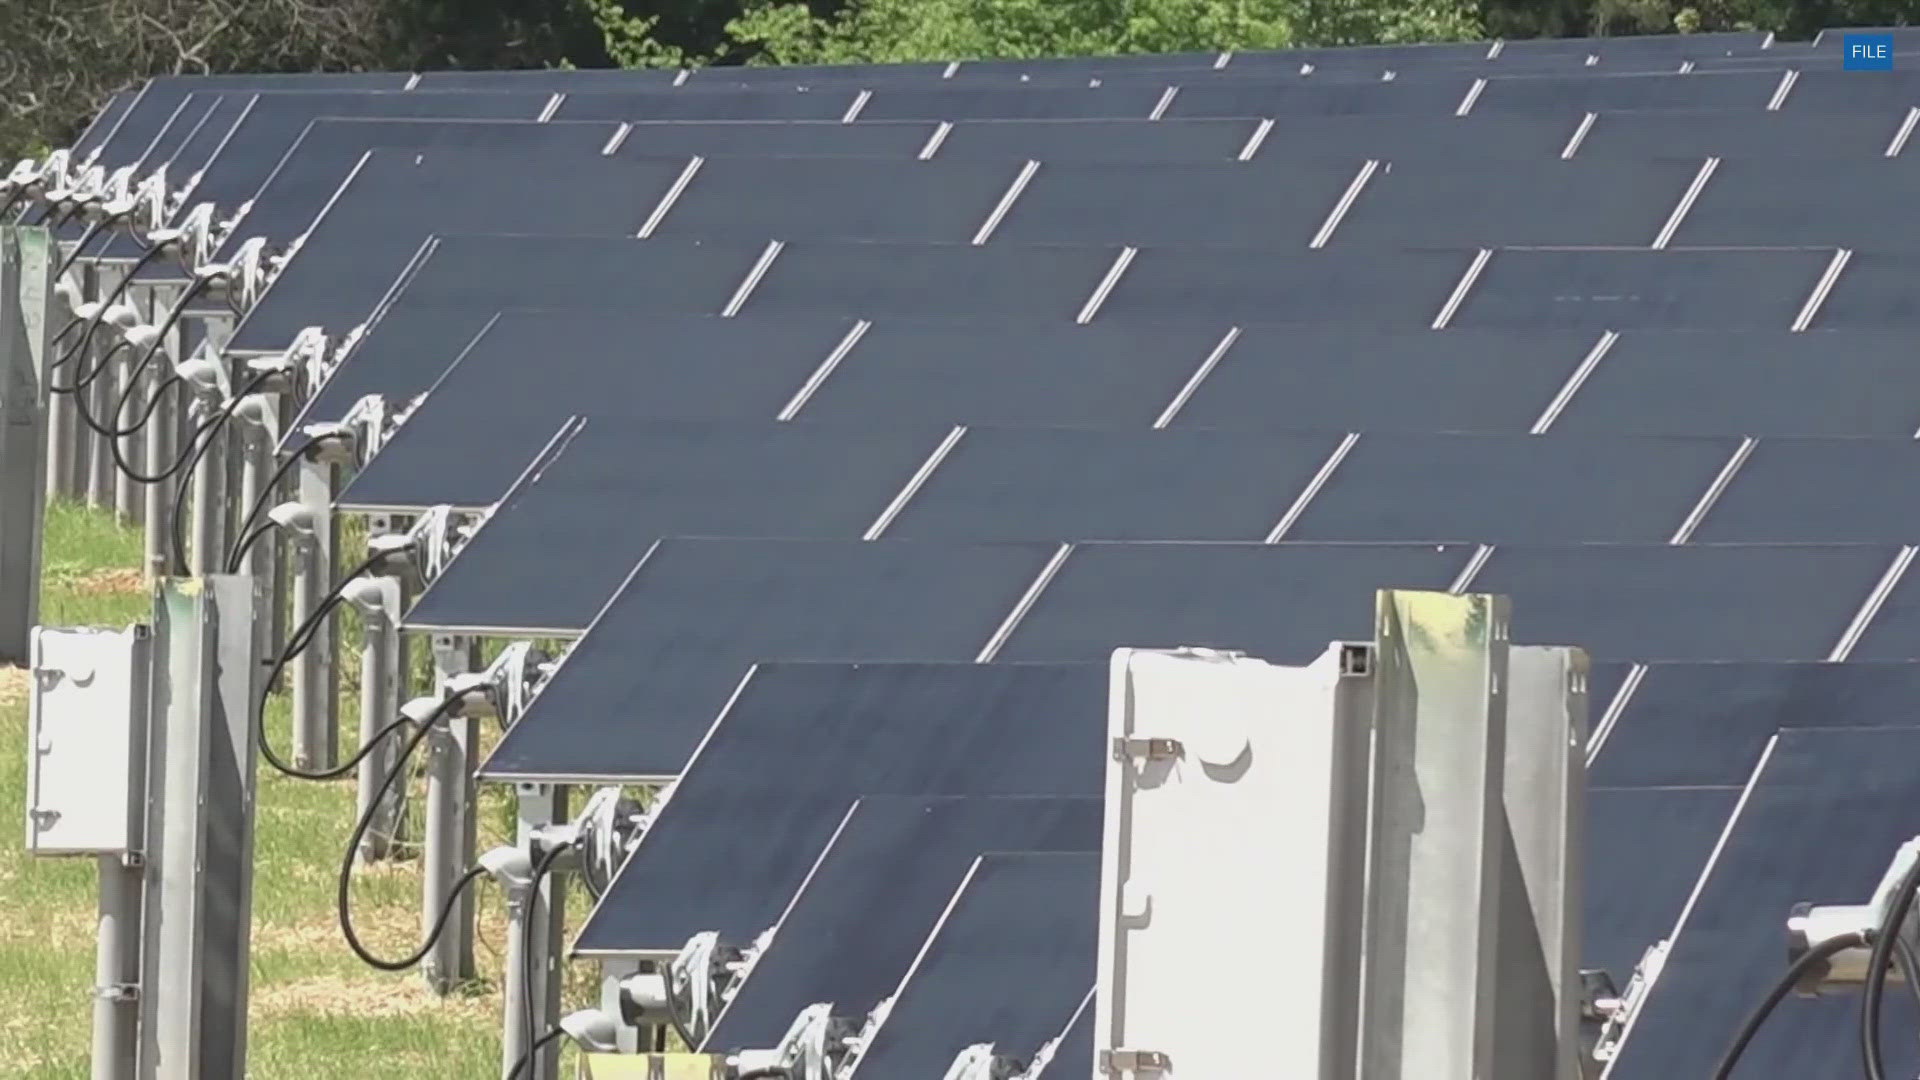 Silicon Ranch is working on solar projects in the county, on DENSO property.